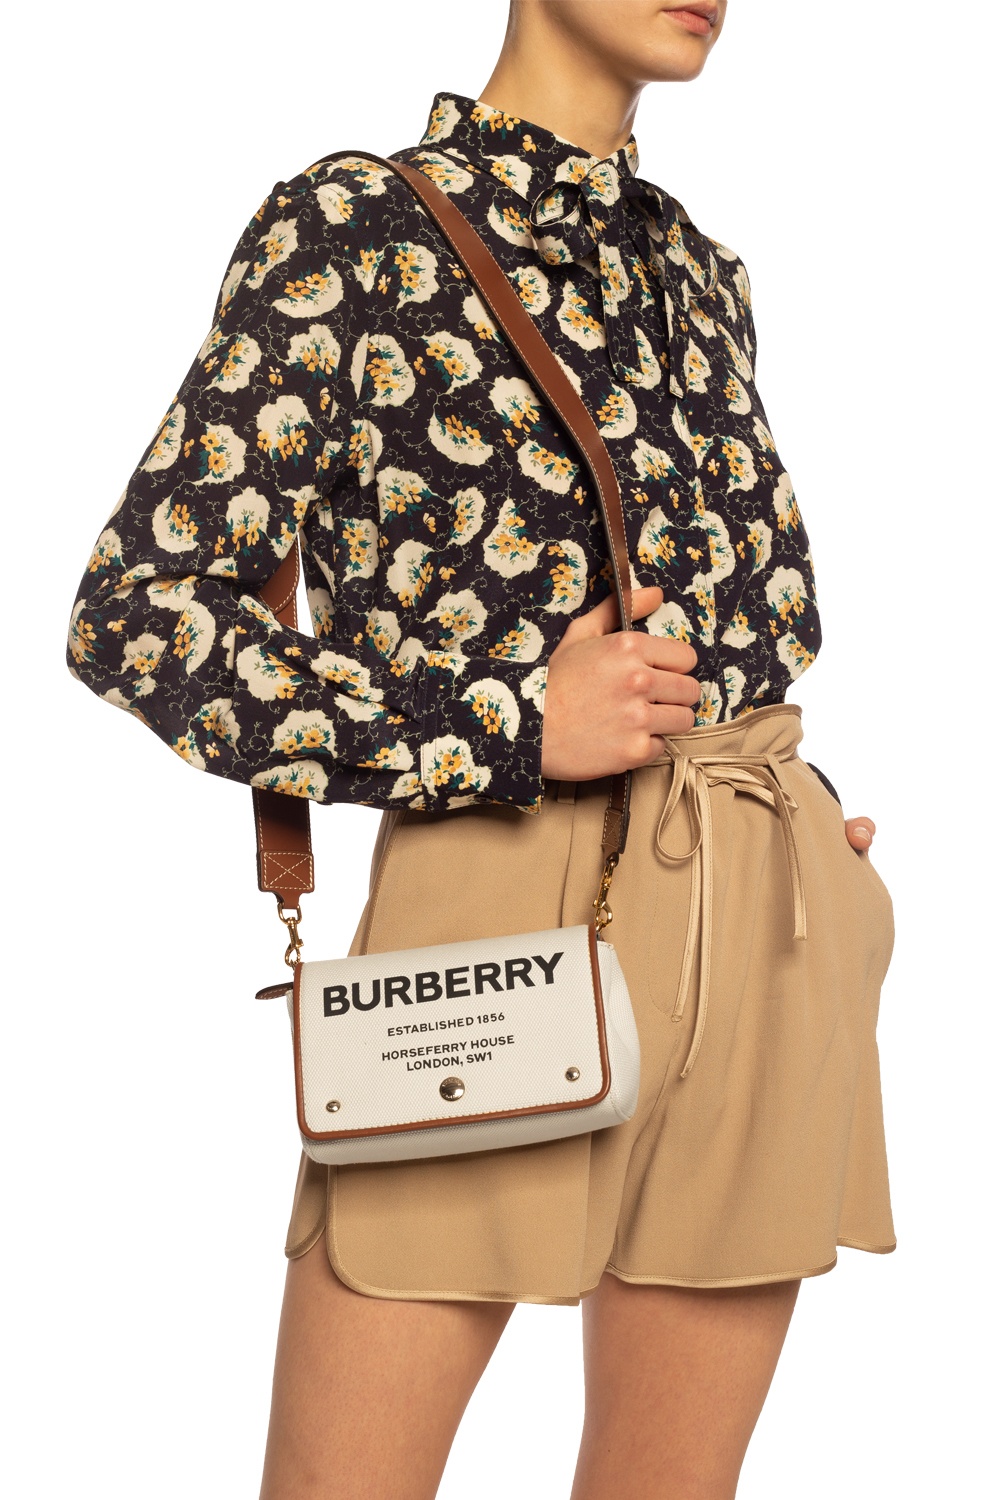 BURBERRY Hackberry Logo Printed Canvas Bag for Women